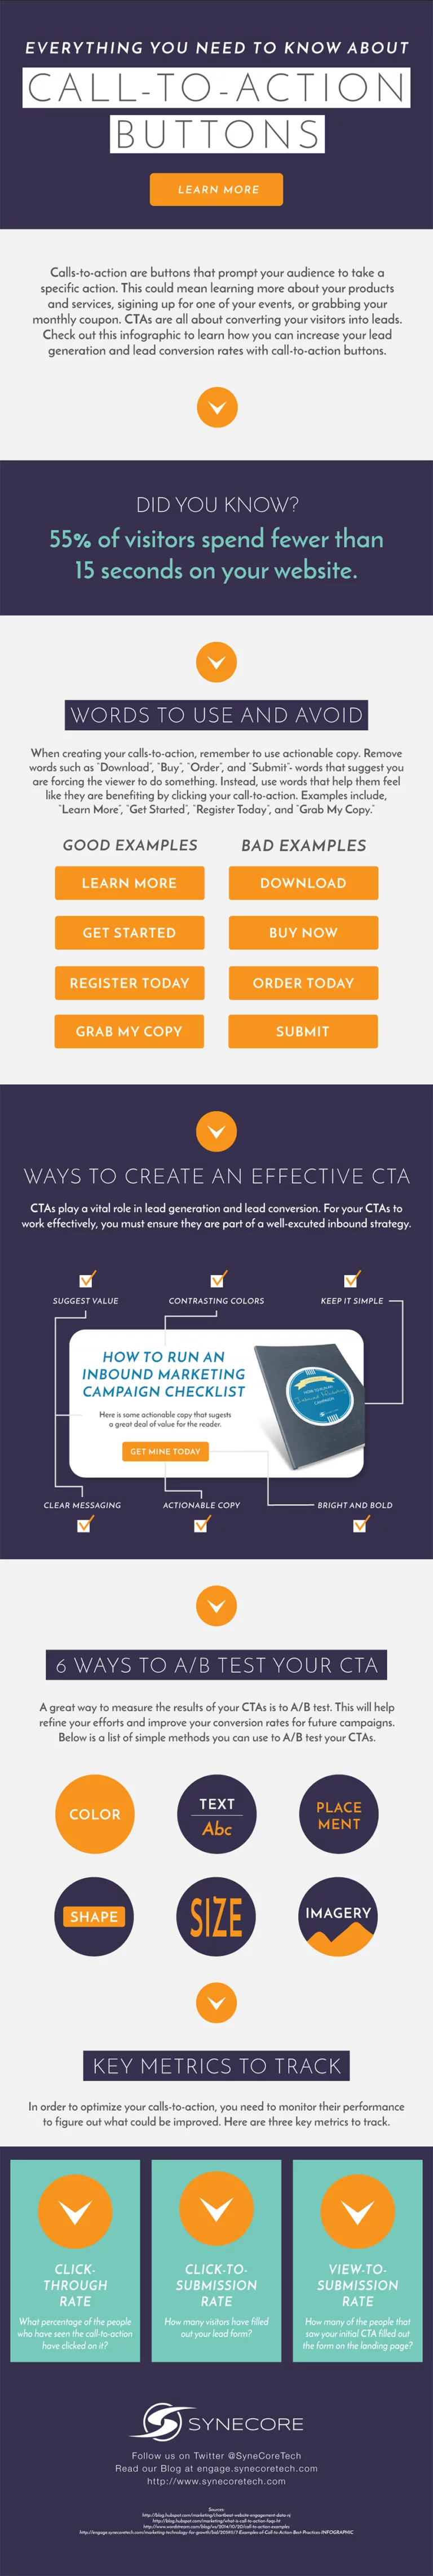 the best worst words to use in your website call to action buttons infographic